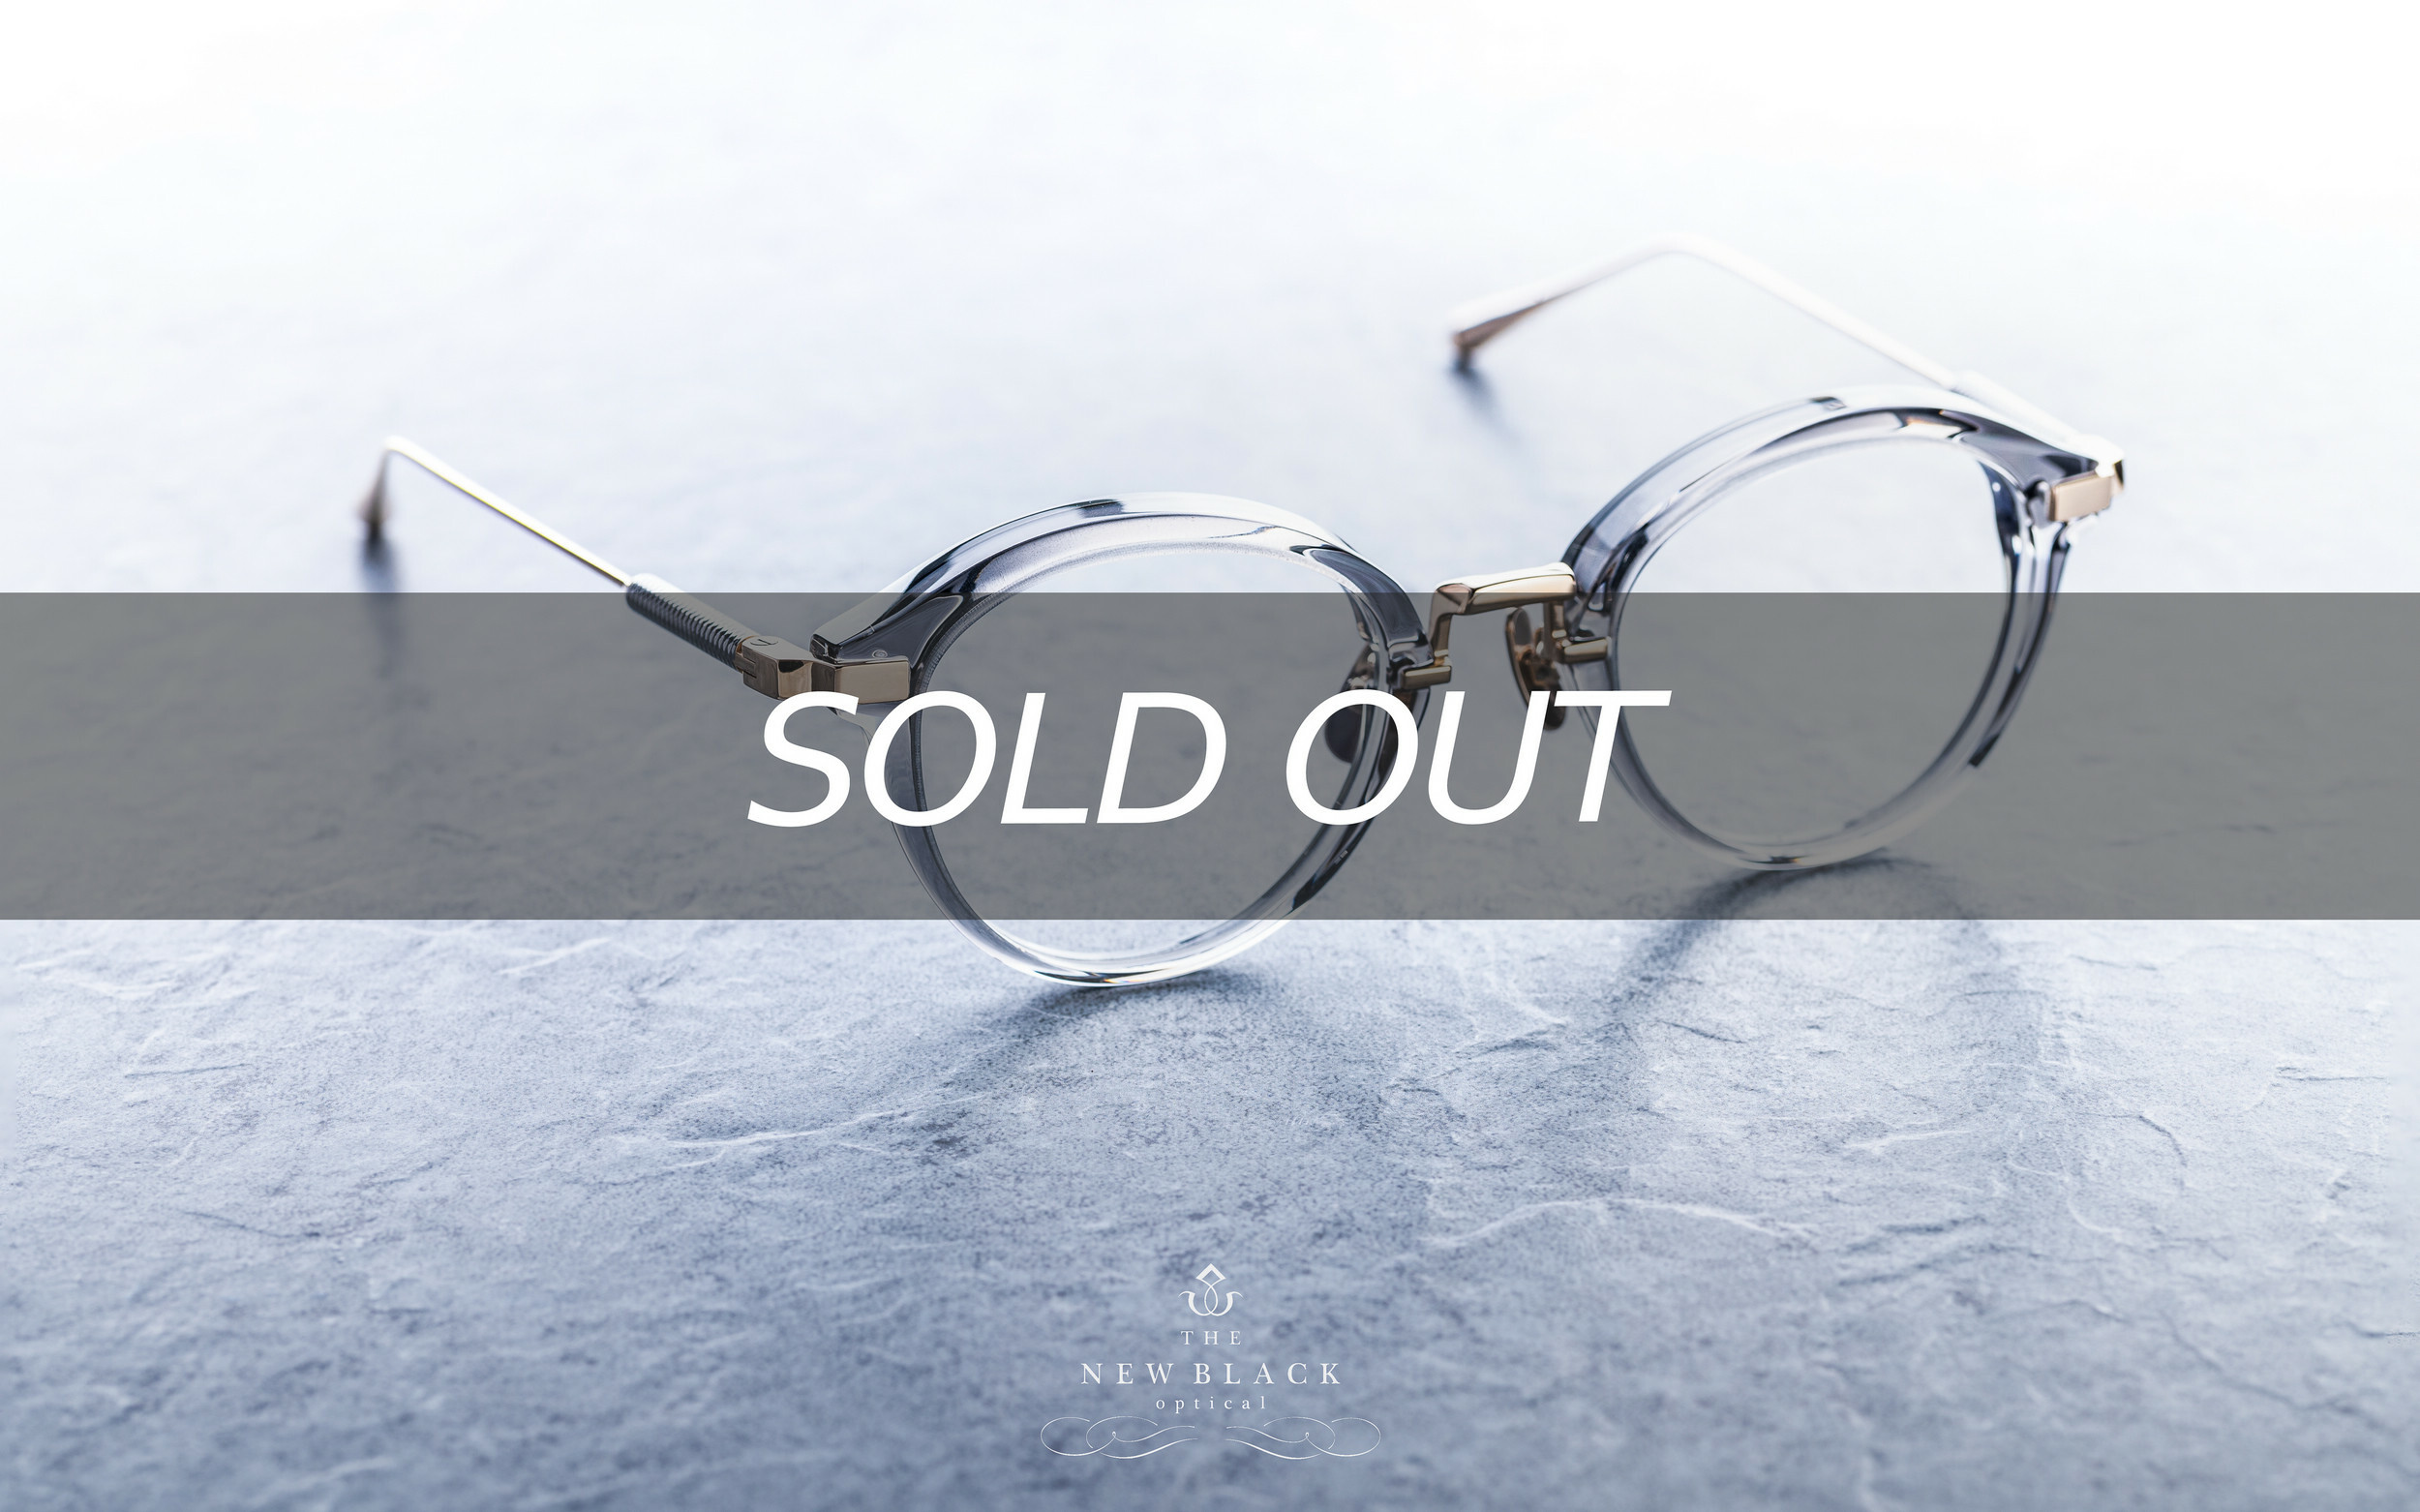 The White Screen 透灰Double Sold Out!】